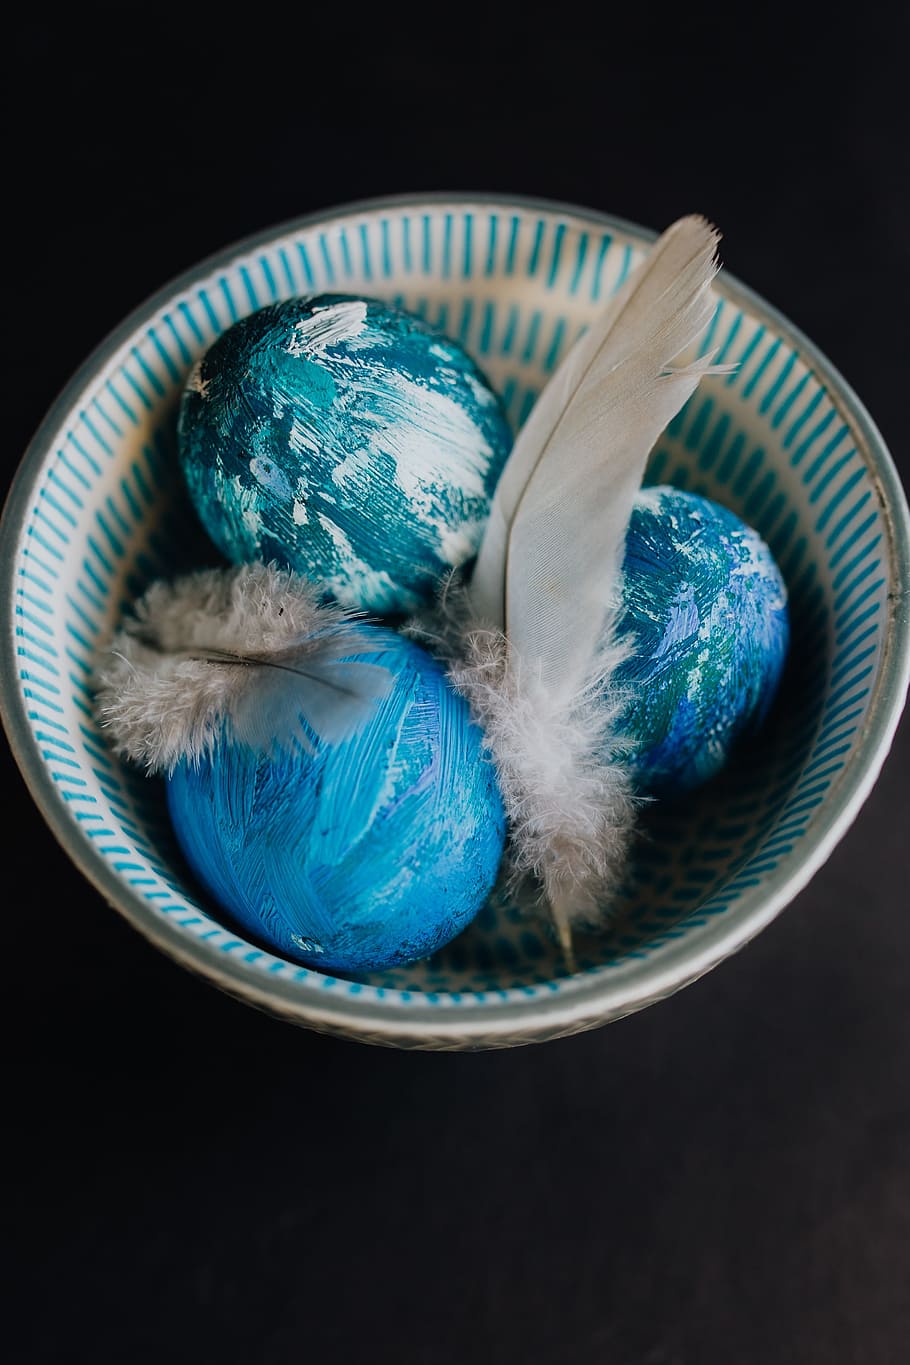 Blue Easter Eggs, colorful, painted, indoors, still life, black background